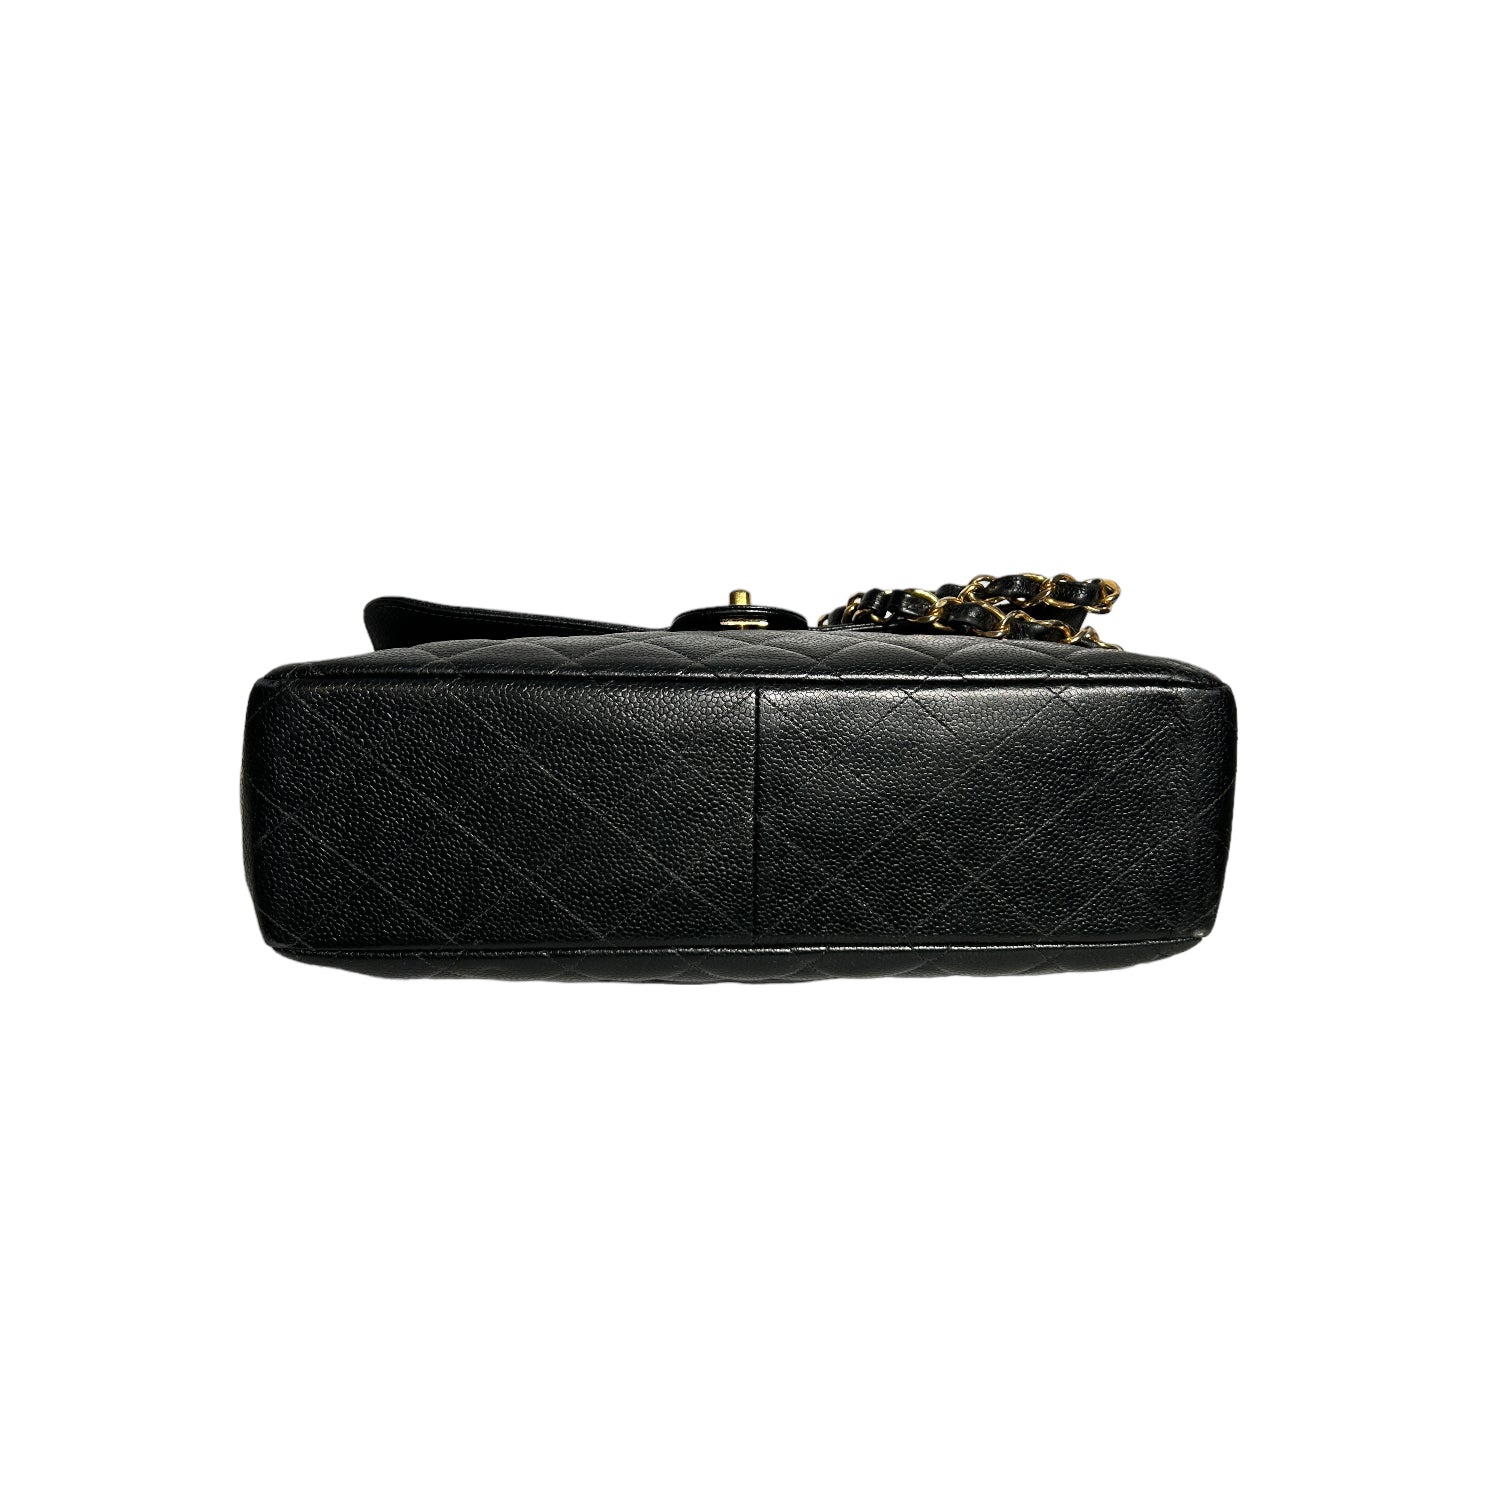 CHANEL Classic Jumbo Black Quilted Caviar Leather 24k Gold